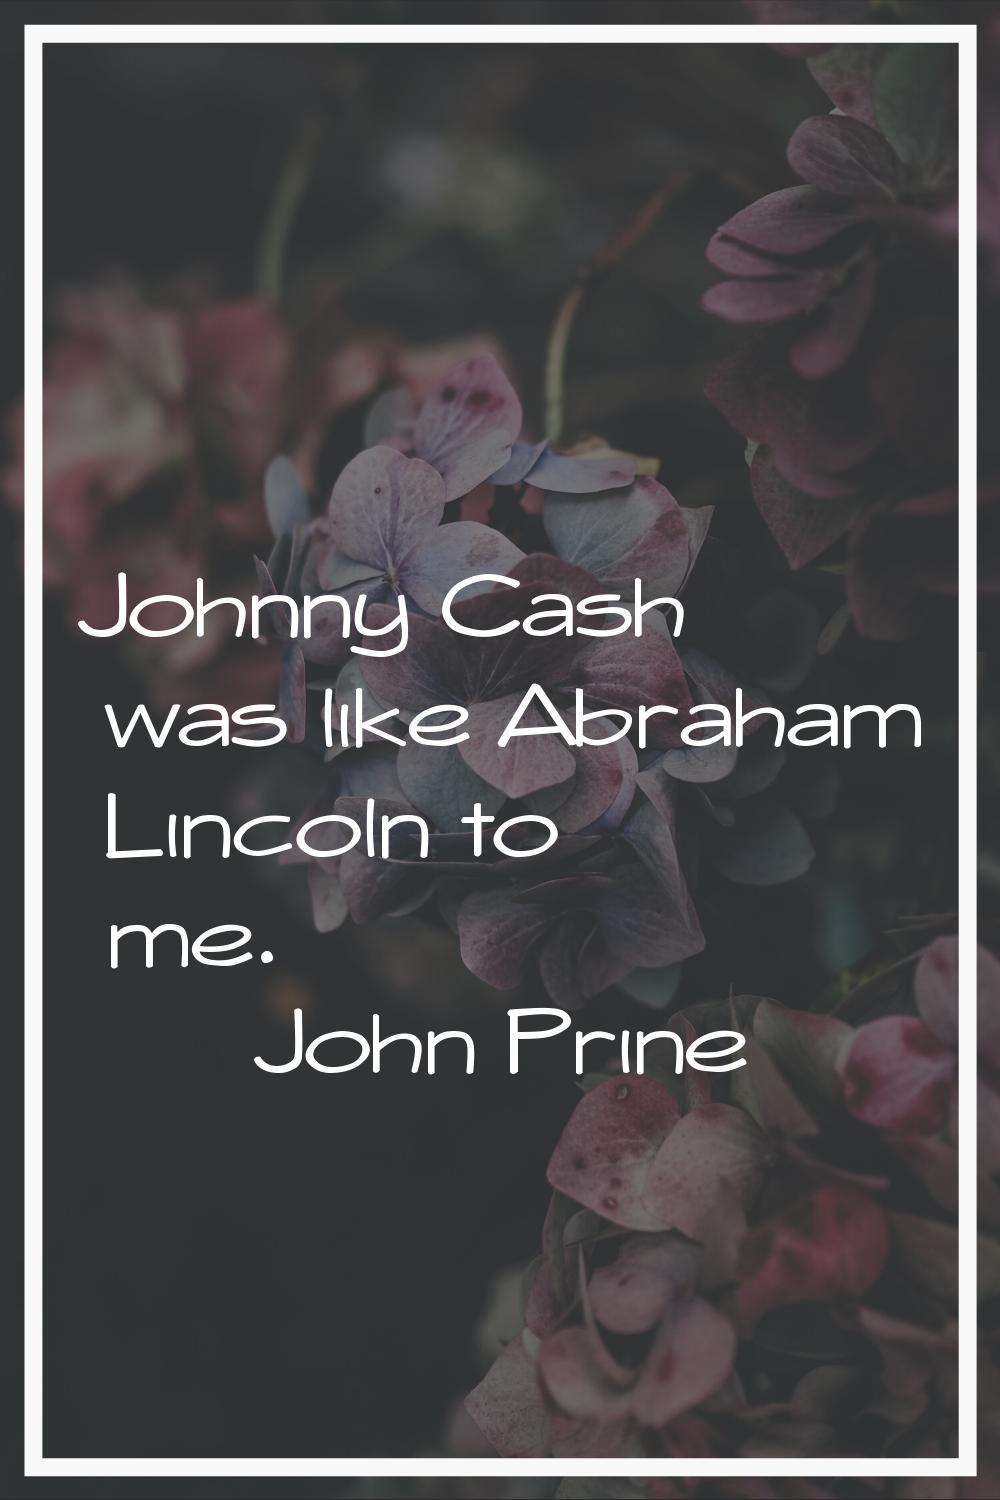 Johnny Cash was like Abraham Lincoln to me.